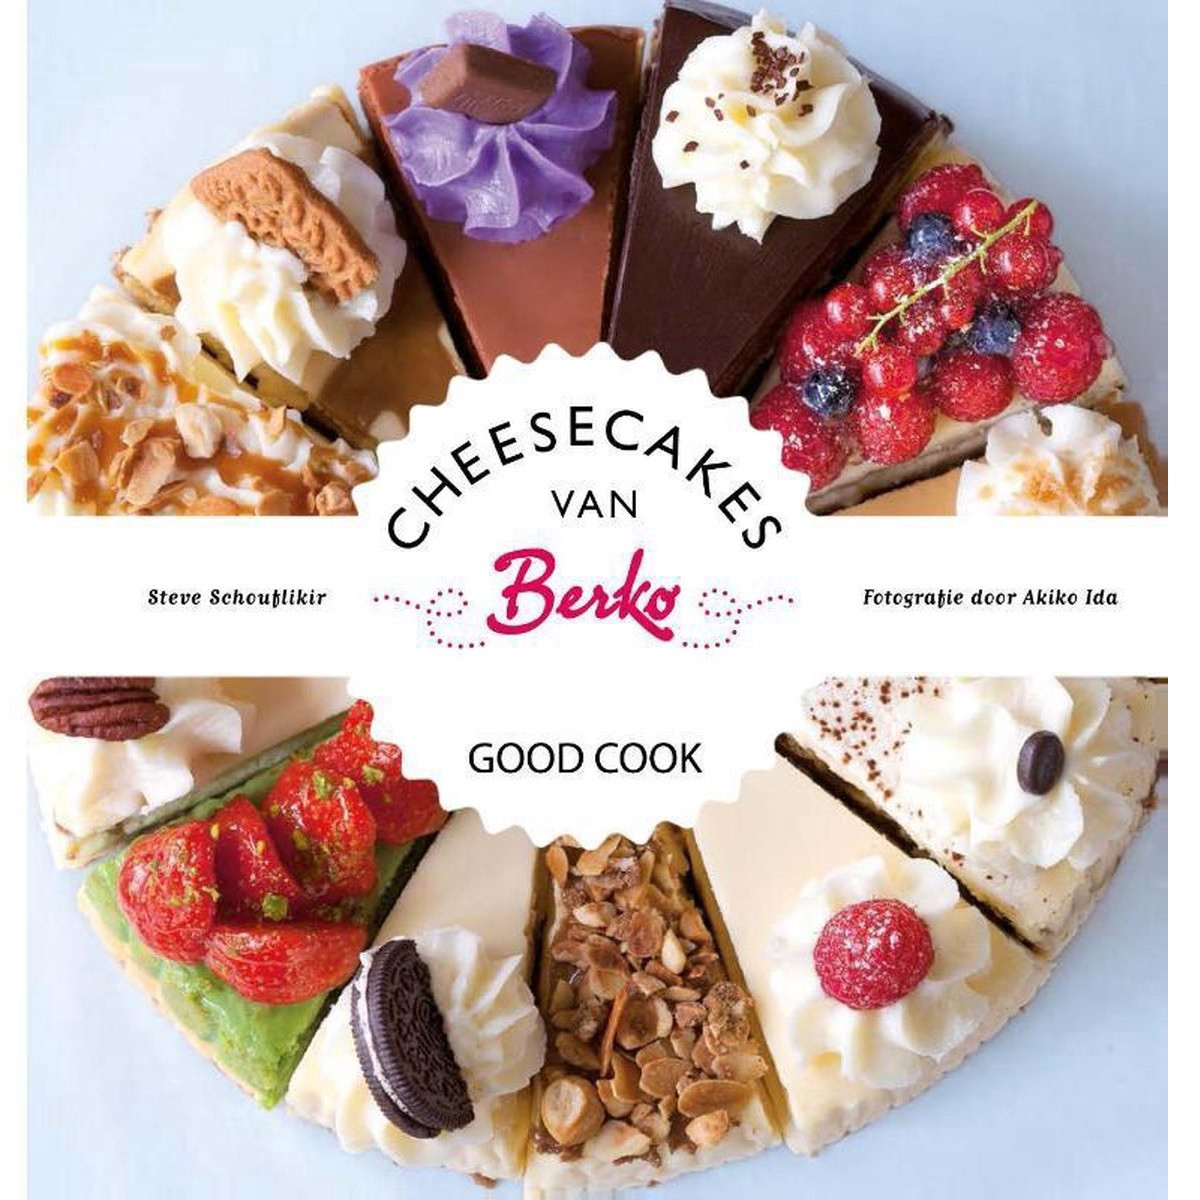 Book: Cheesecakes by Berko